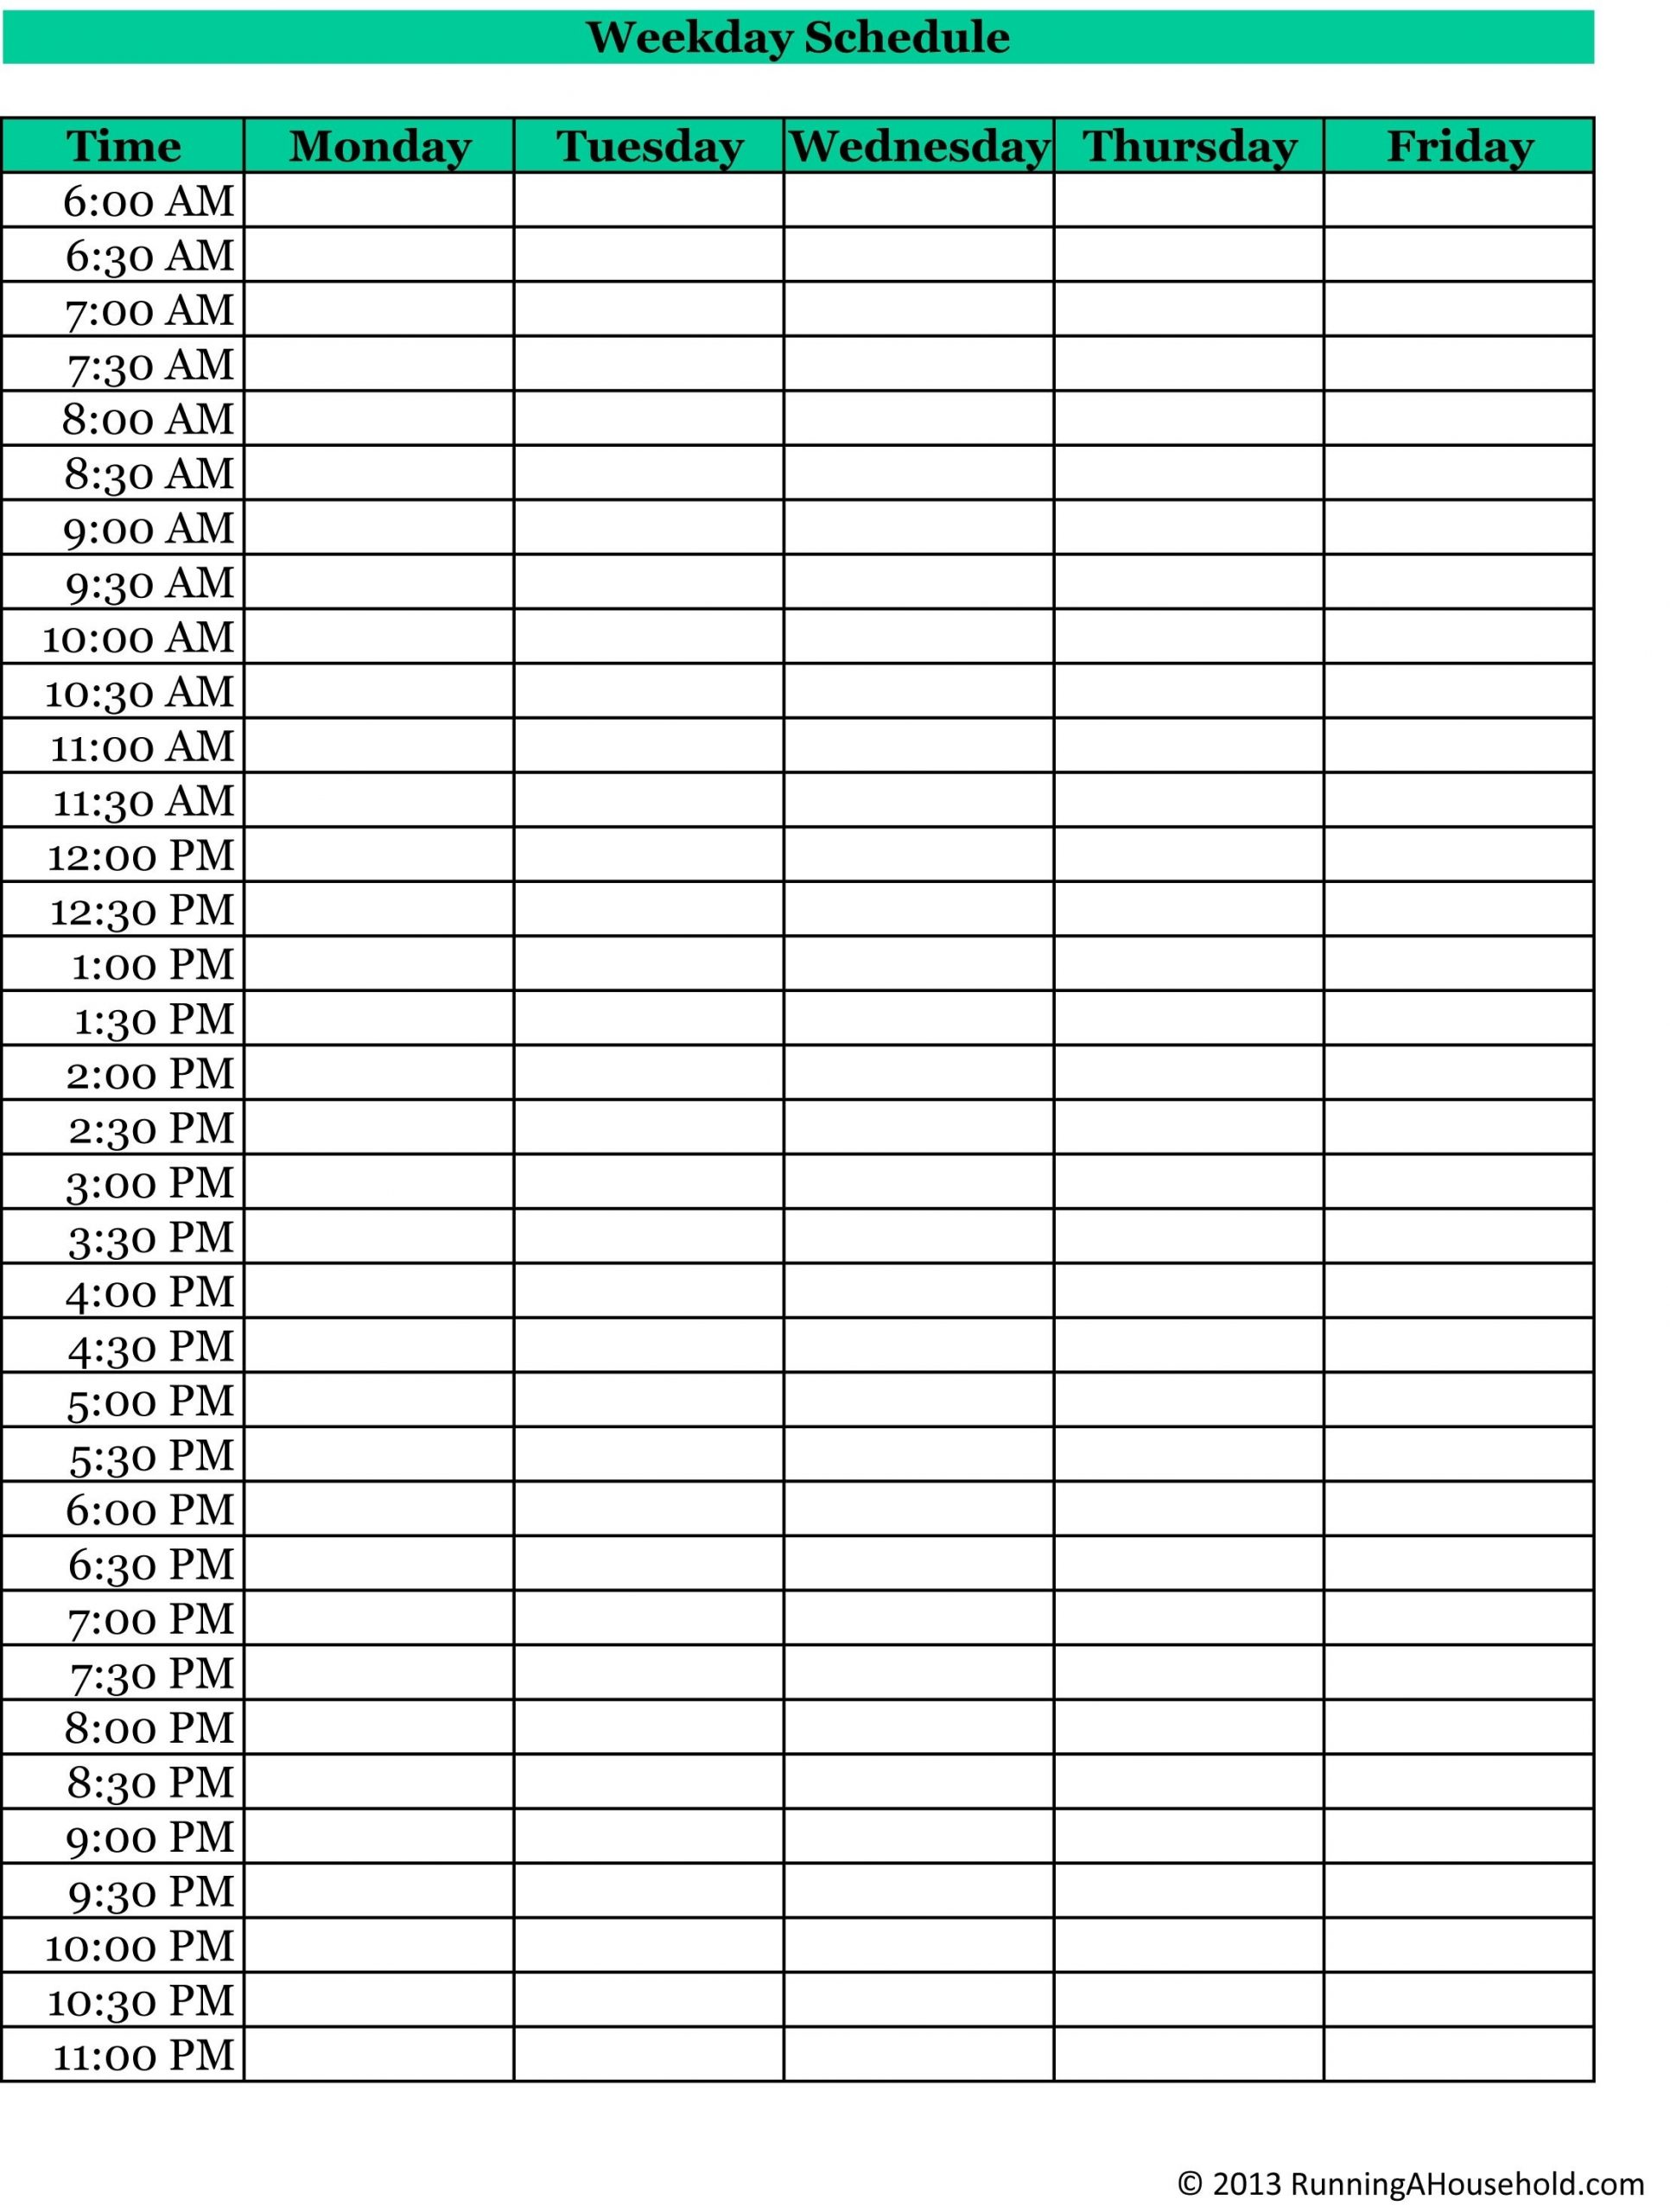 Printable Weekly Schedule With Hours Monday To Friday Time And Date Calendars Printable